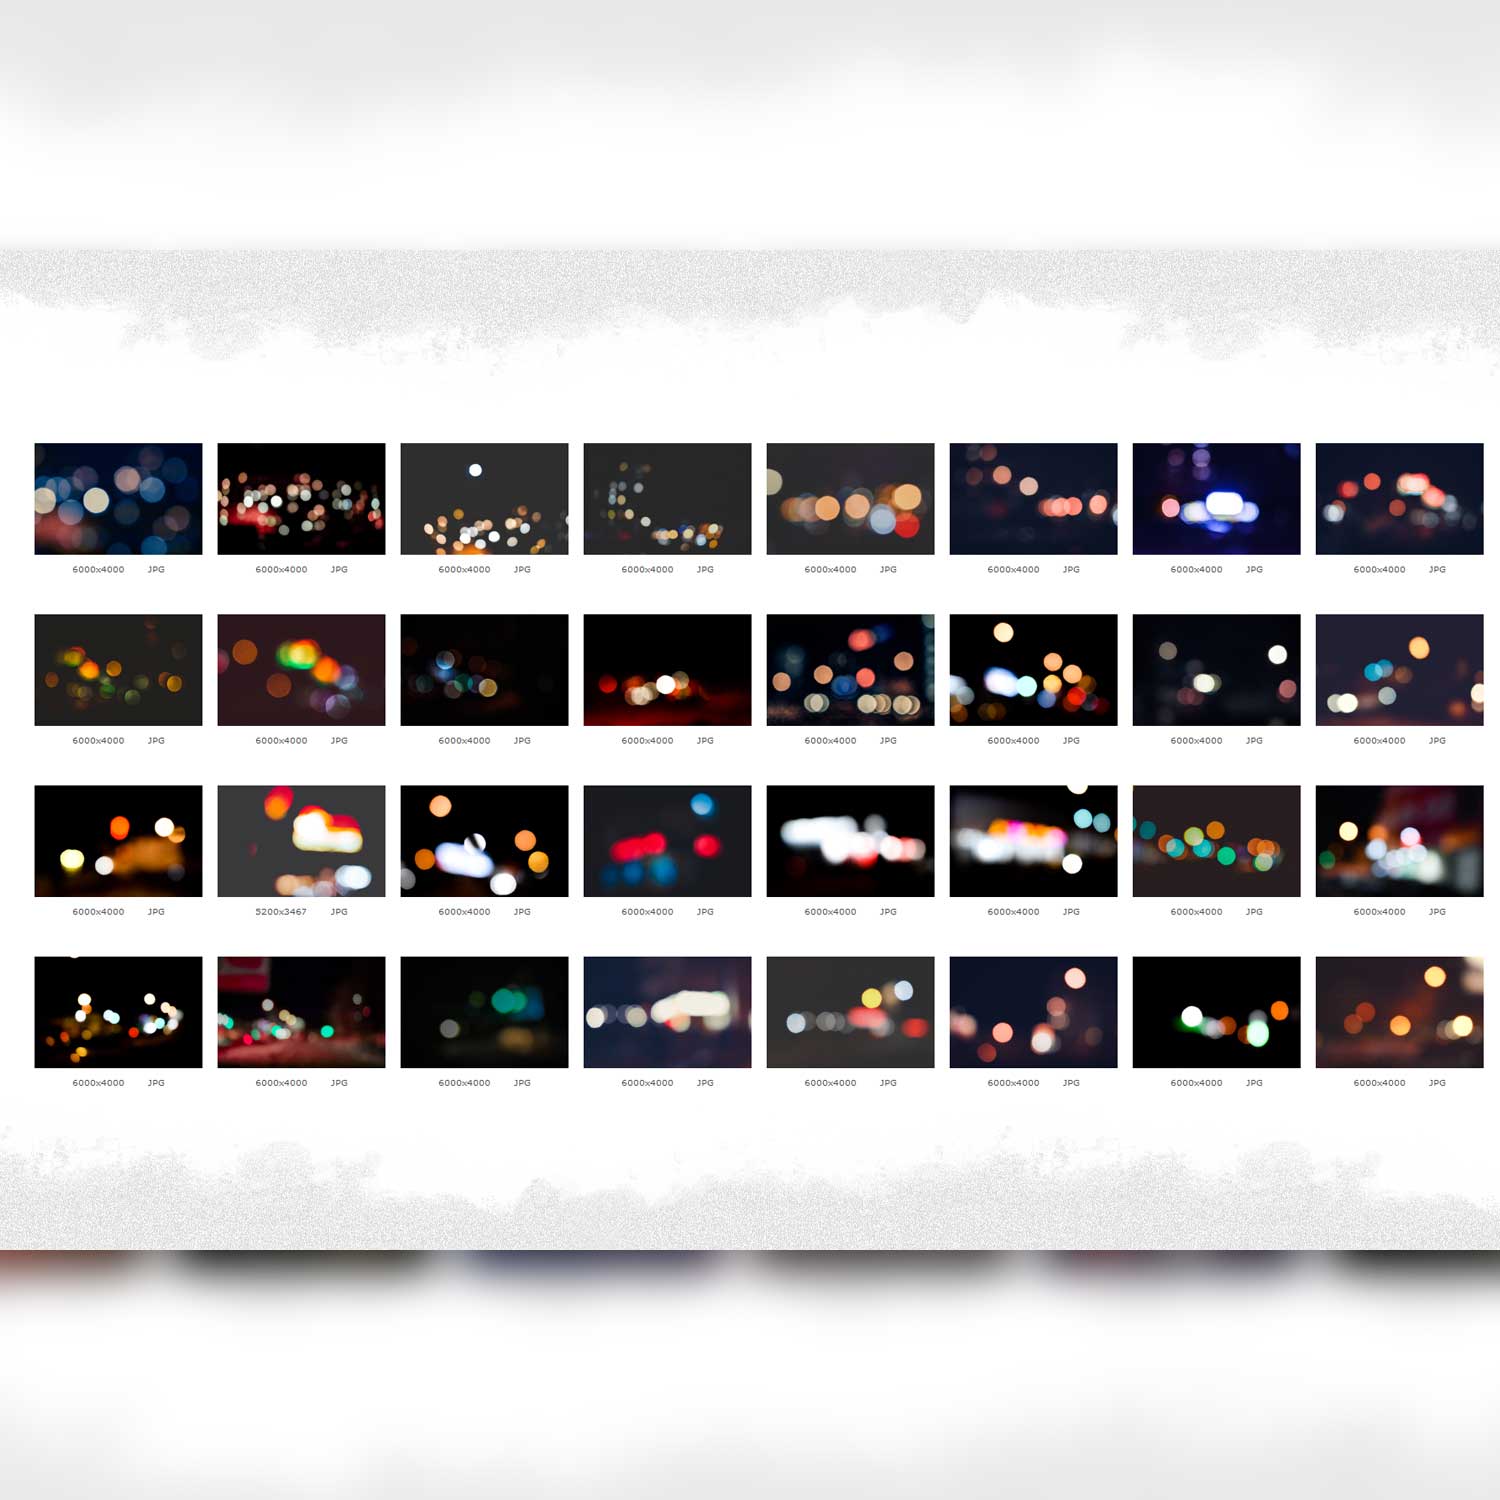 Prism Christmas String Lights Bokeh Photoshop Overlay Images Gallery Vol2.